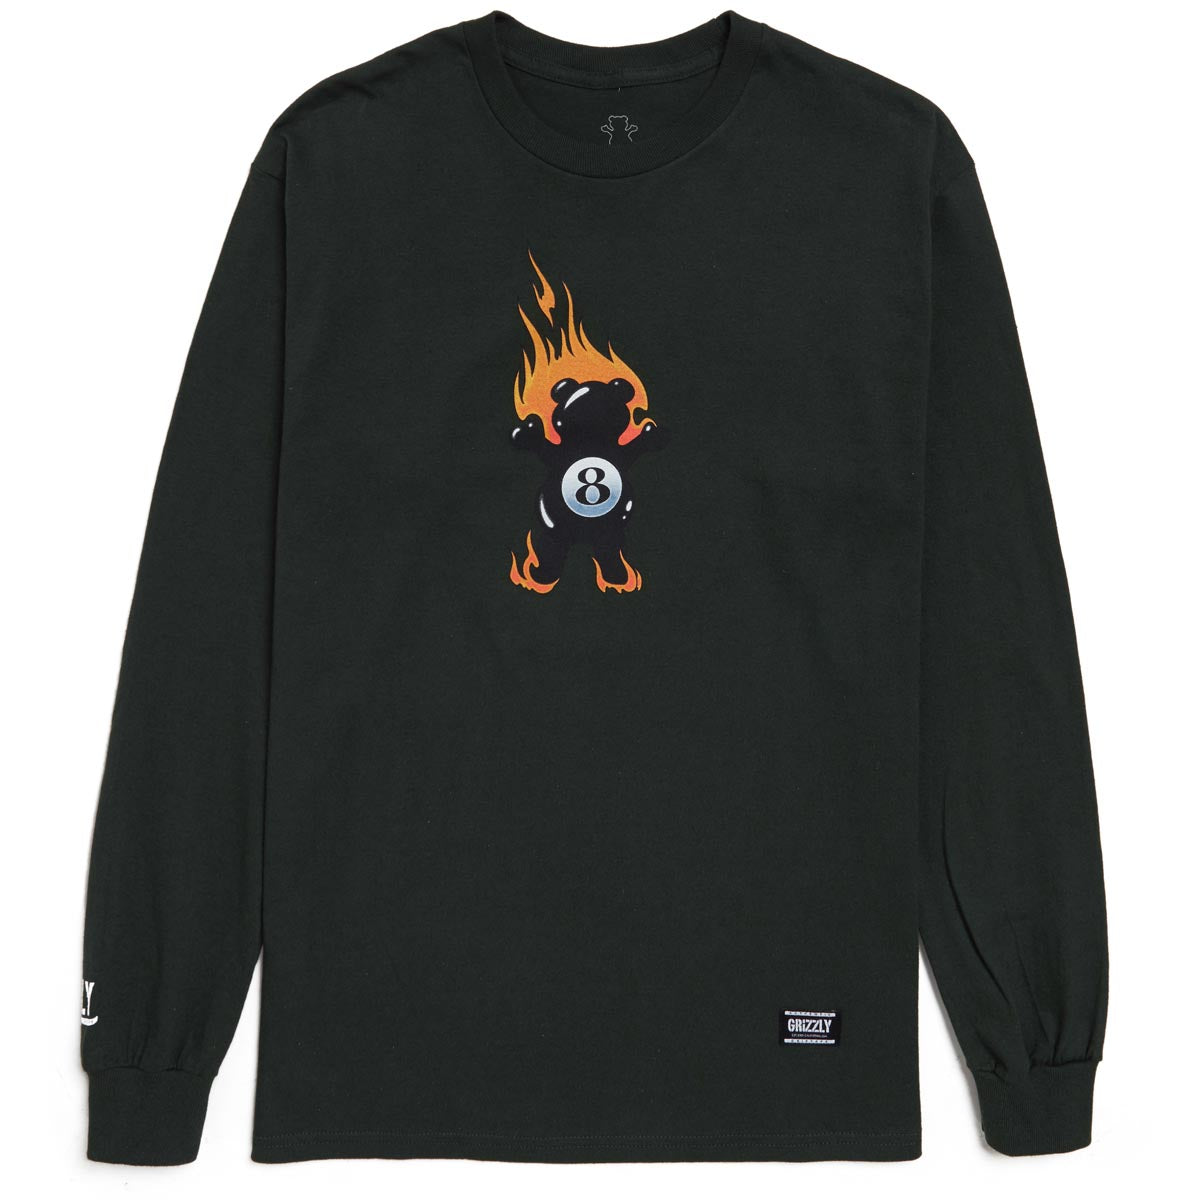 Grizzly Behind The 8Ball Long Sleeve T-Shirt - Forest Green image 1